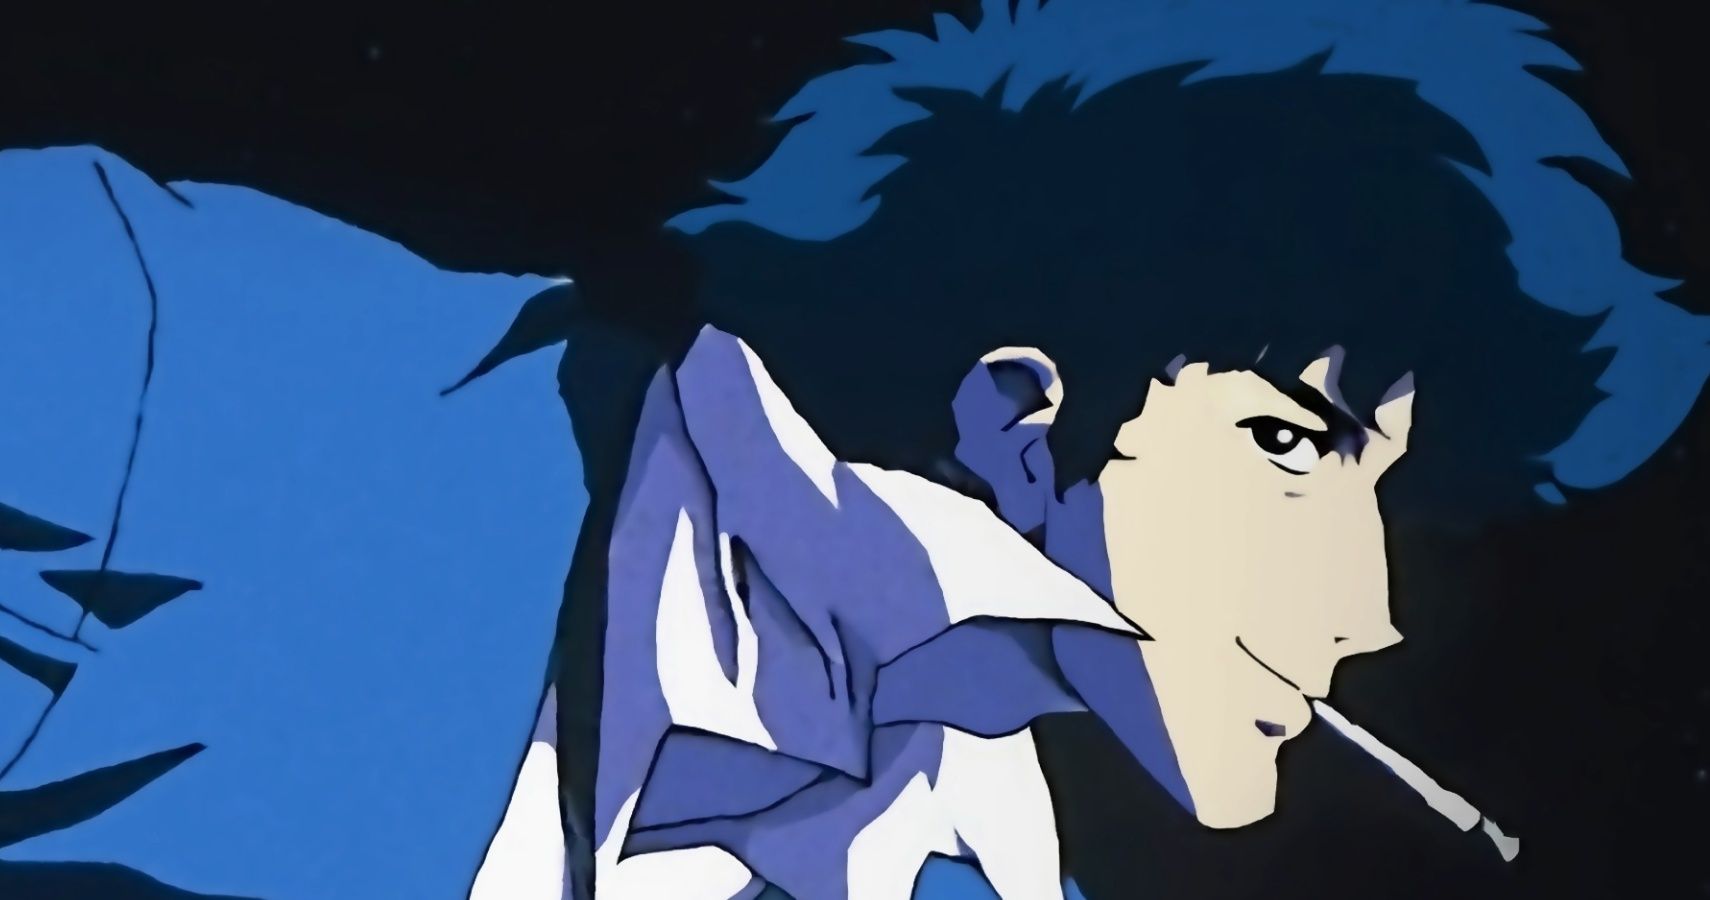 Cowboy Bebop's Spike Spiegel with a cigarette in his mouth